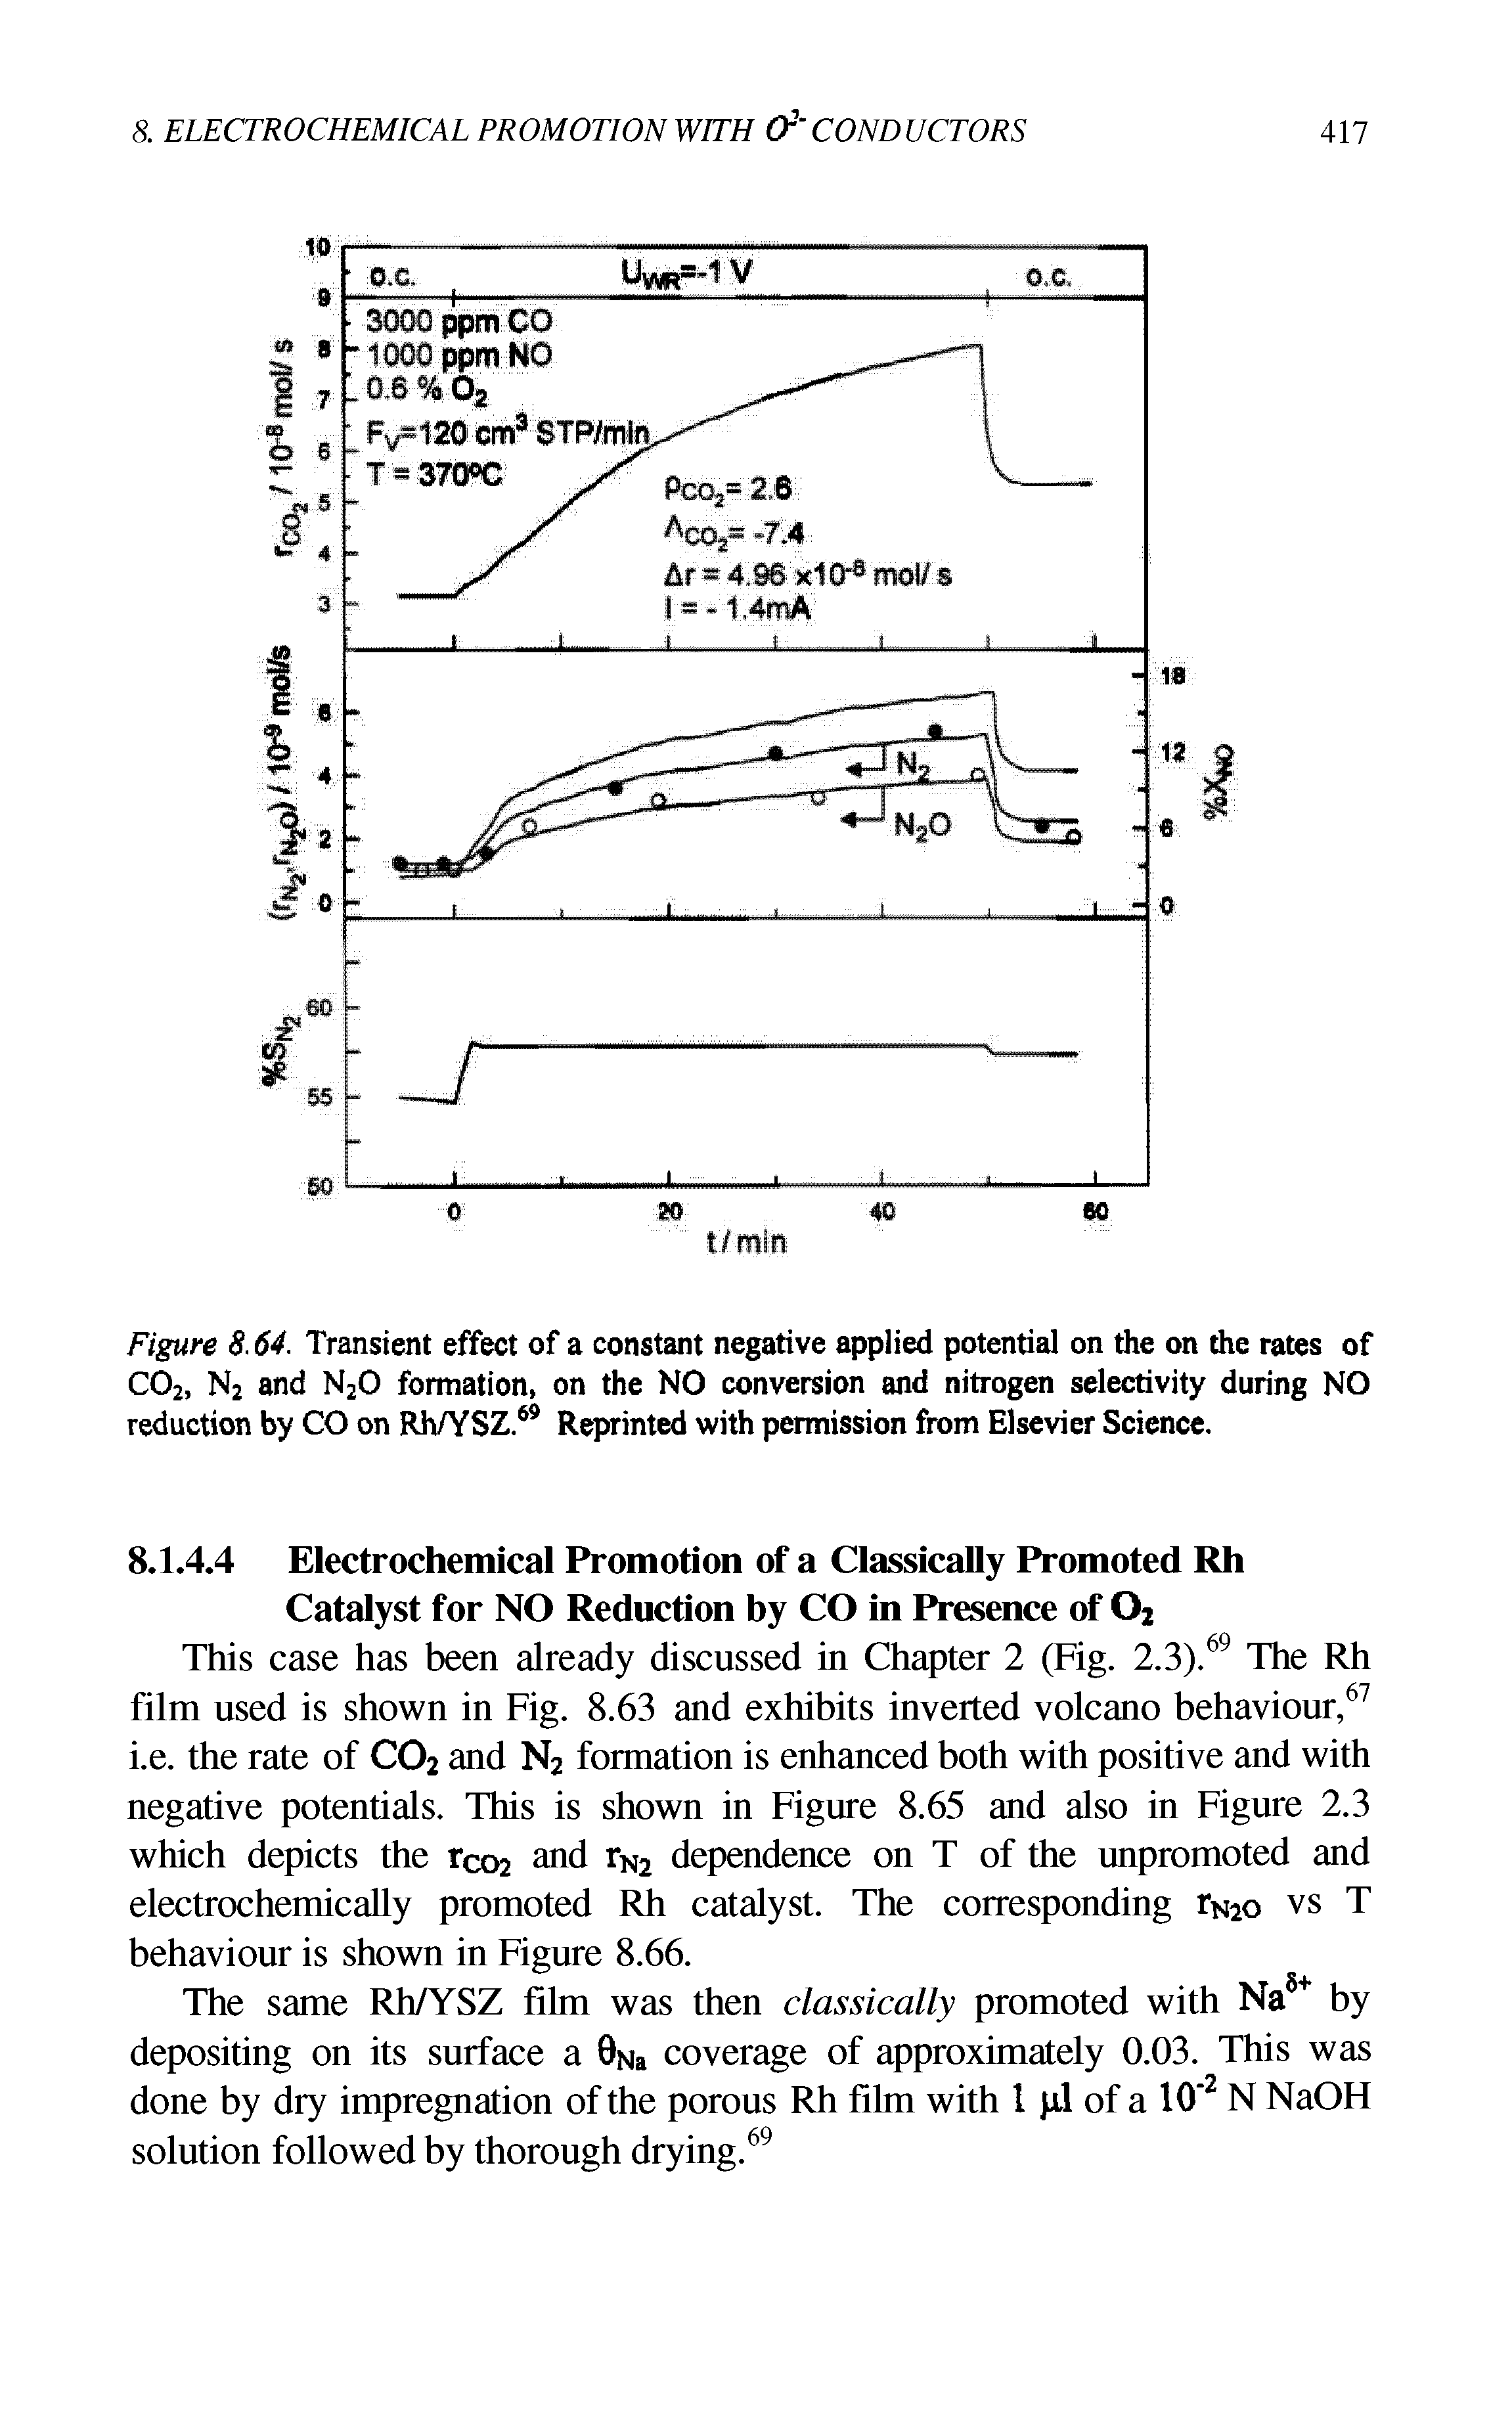 Figure 8.64. Transient effect of a constant negative applied potential on the on the rates of C02, N2 and N20 formation, on the NO conversion and nitrogen selectivity during NO reduction by CO on Rh/YSZ.69 Reprinted with permission from Elsevier Science.